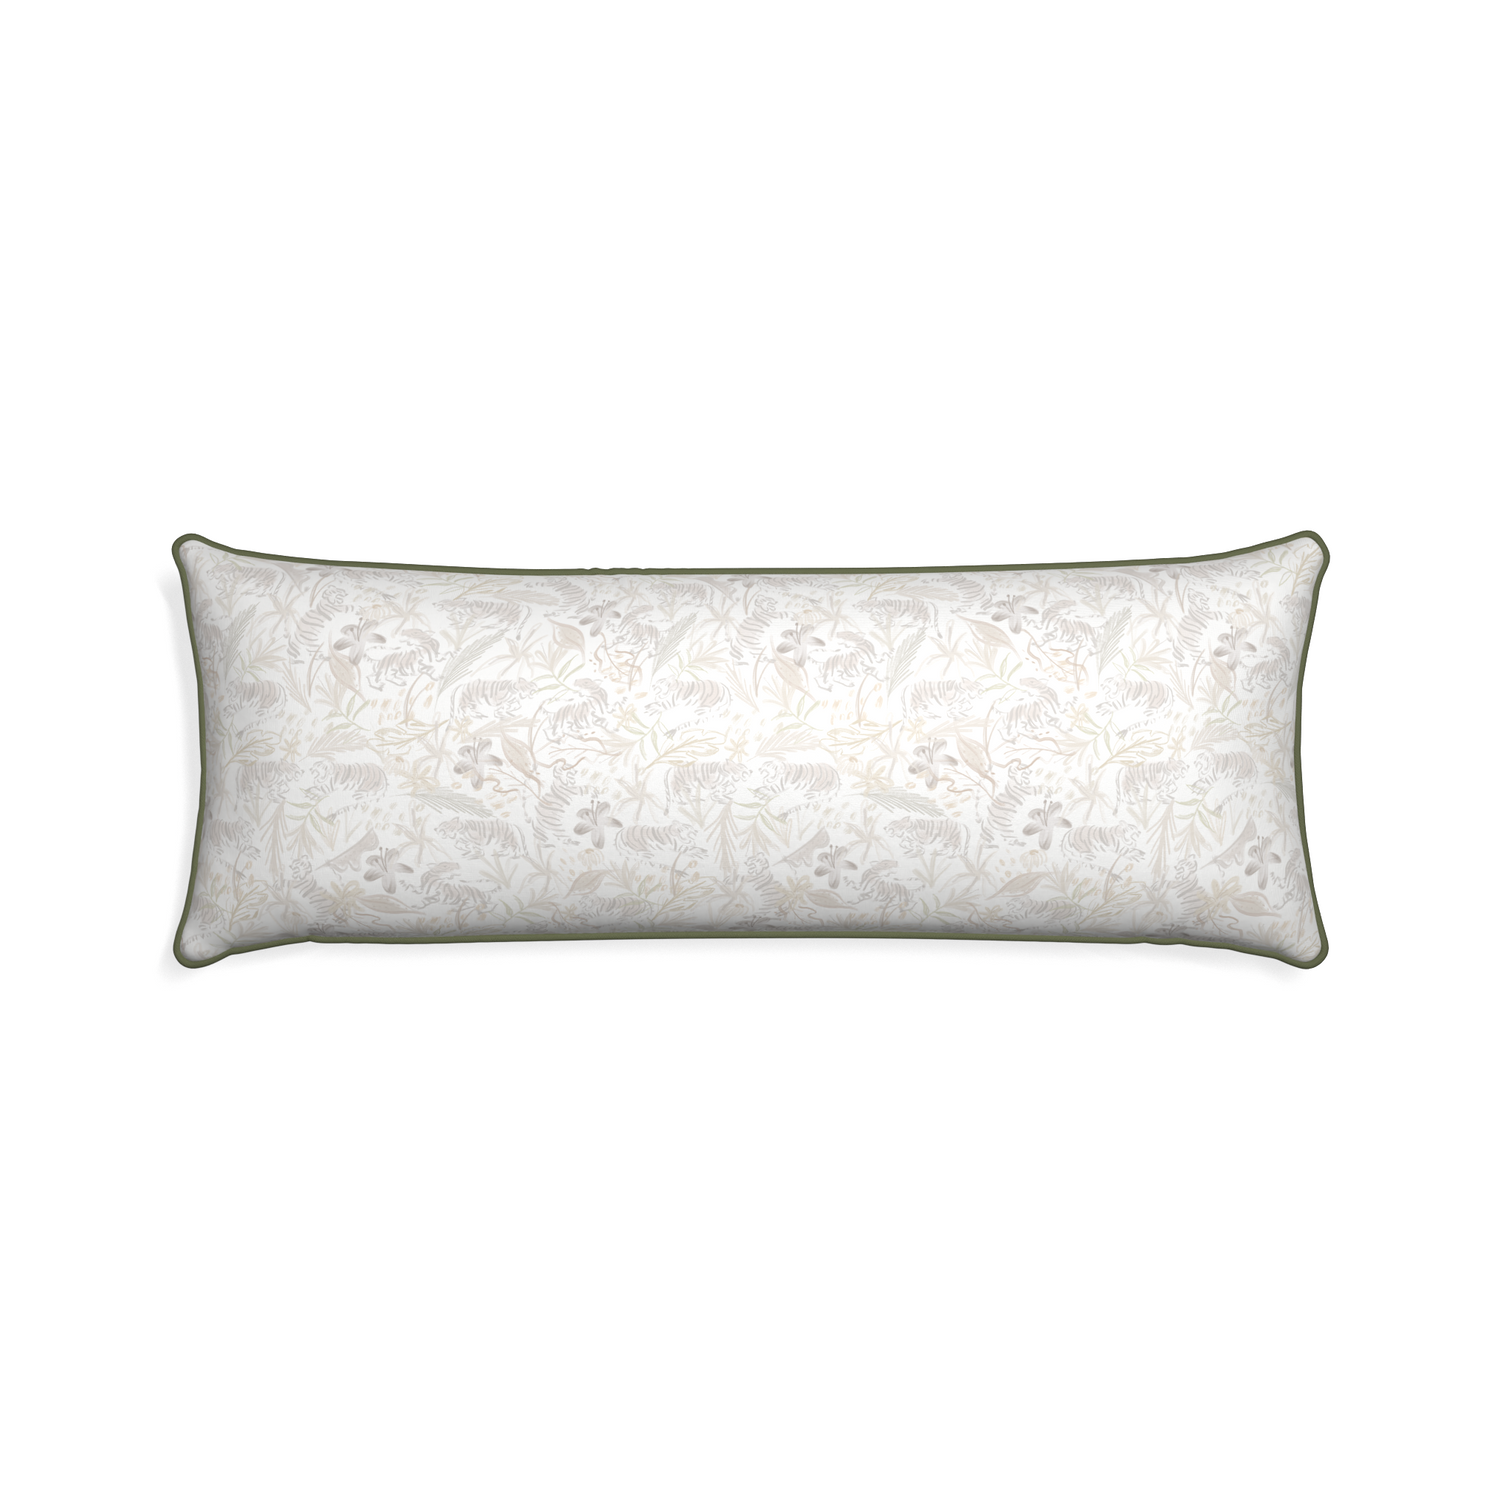 Xl-lumbar frida sand custom pillow with f piping on white background